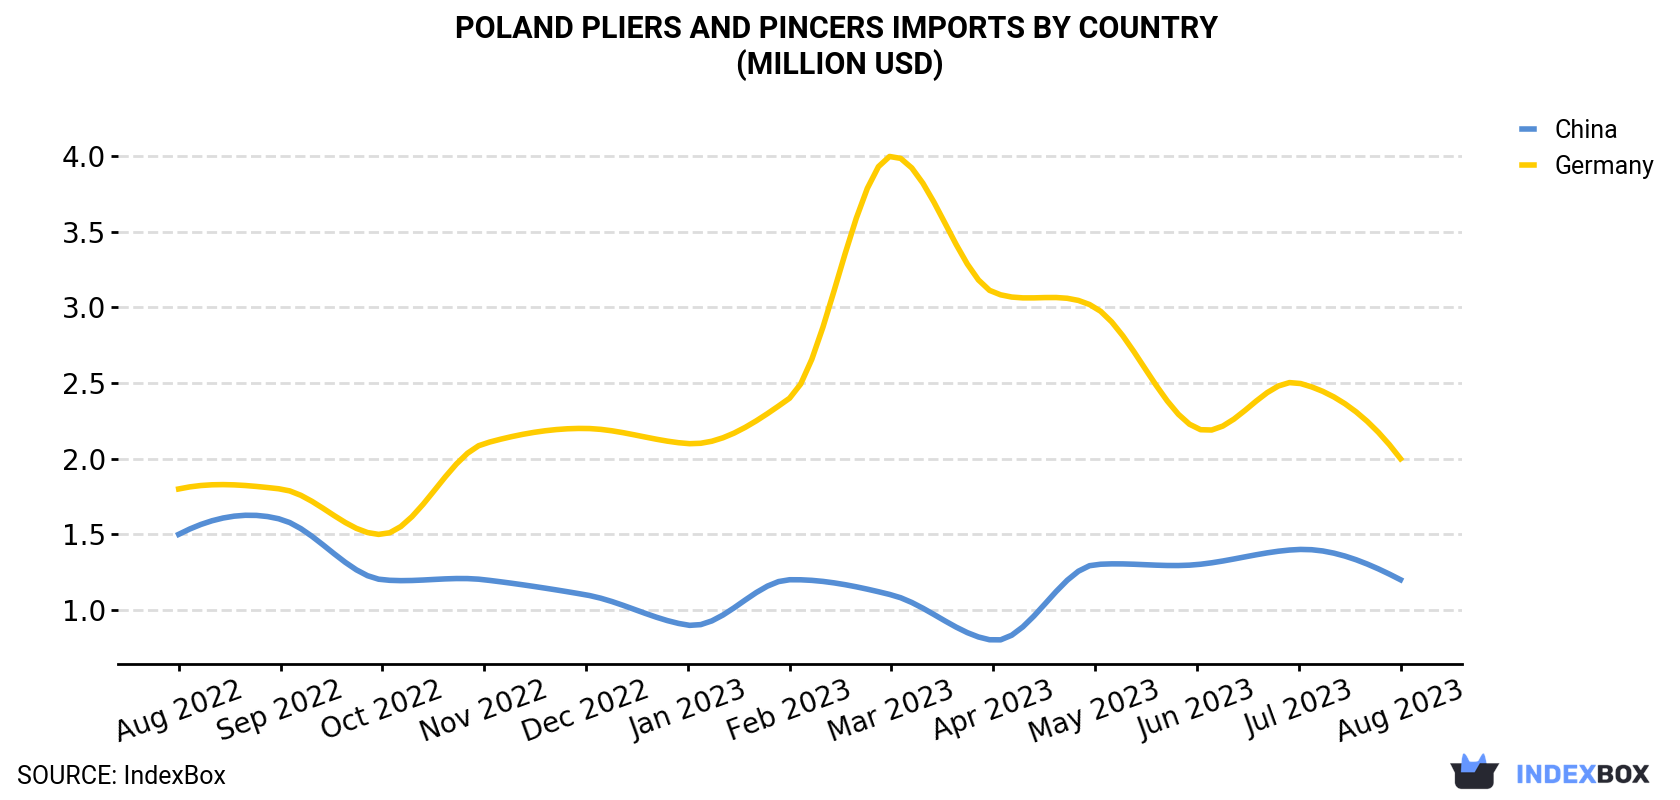 Poland Pliers And Pincers Imports By Country (Million USD)